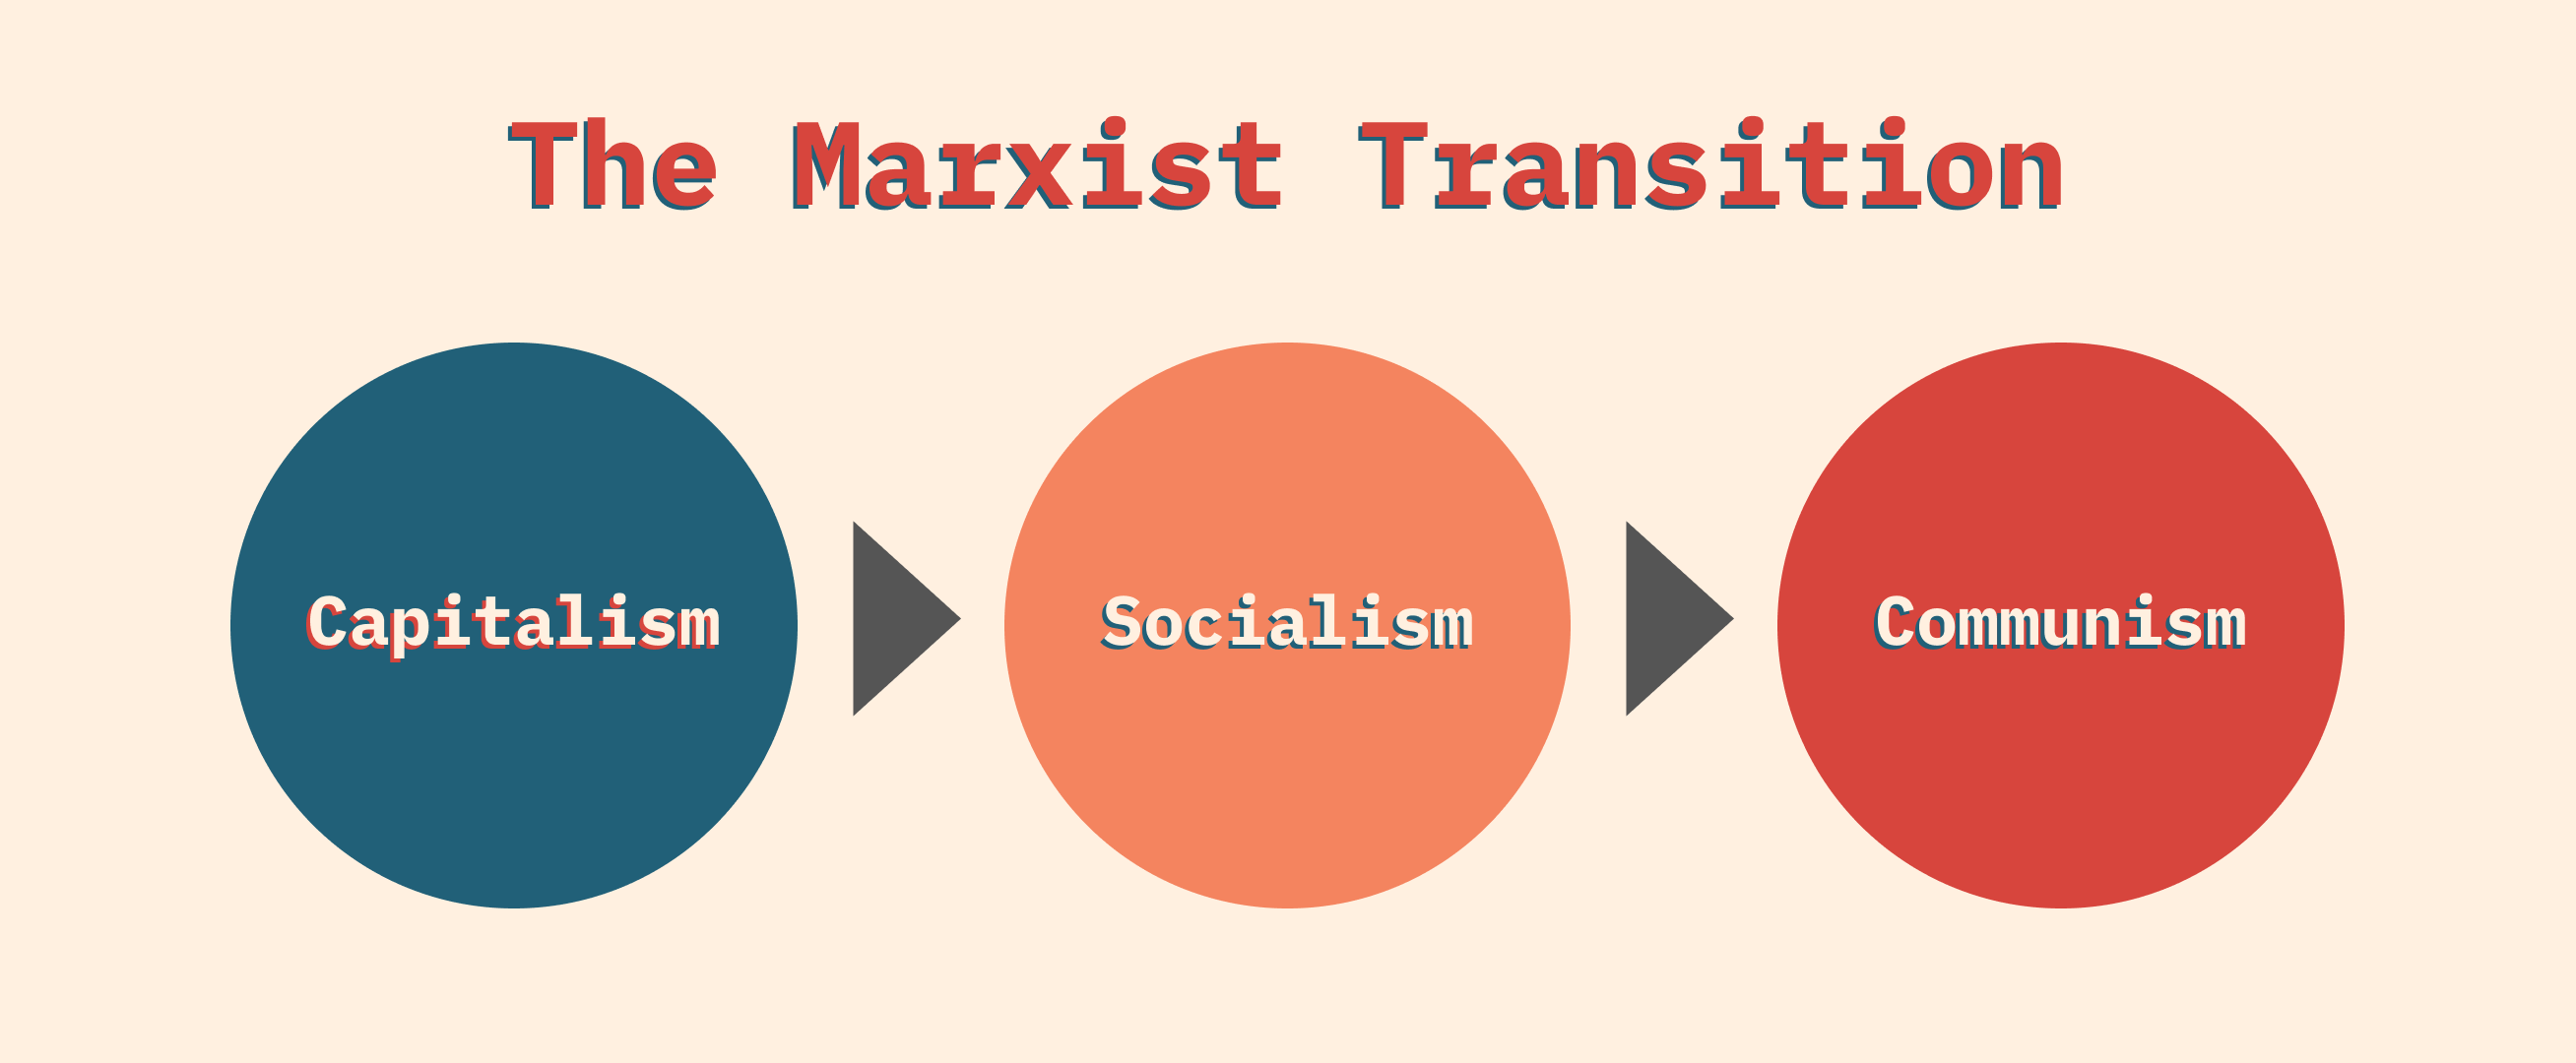 marxist theory government